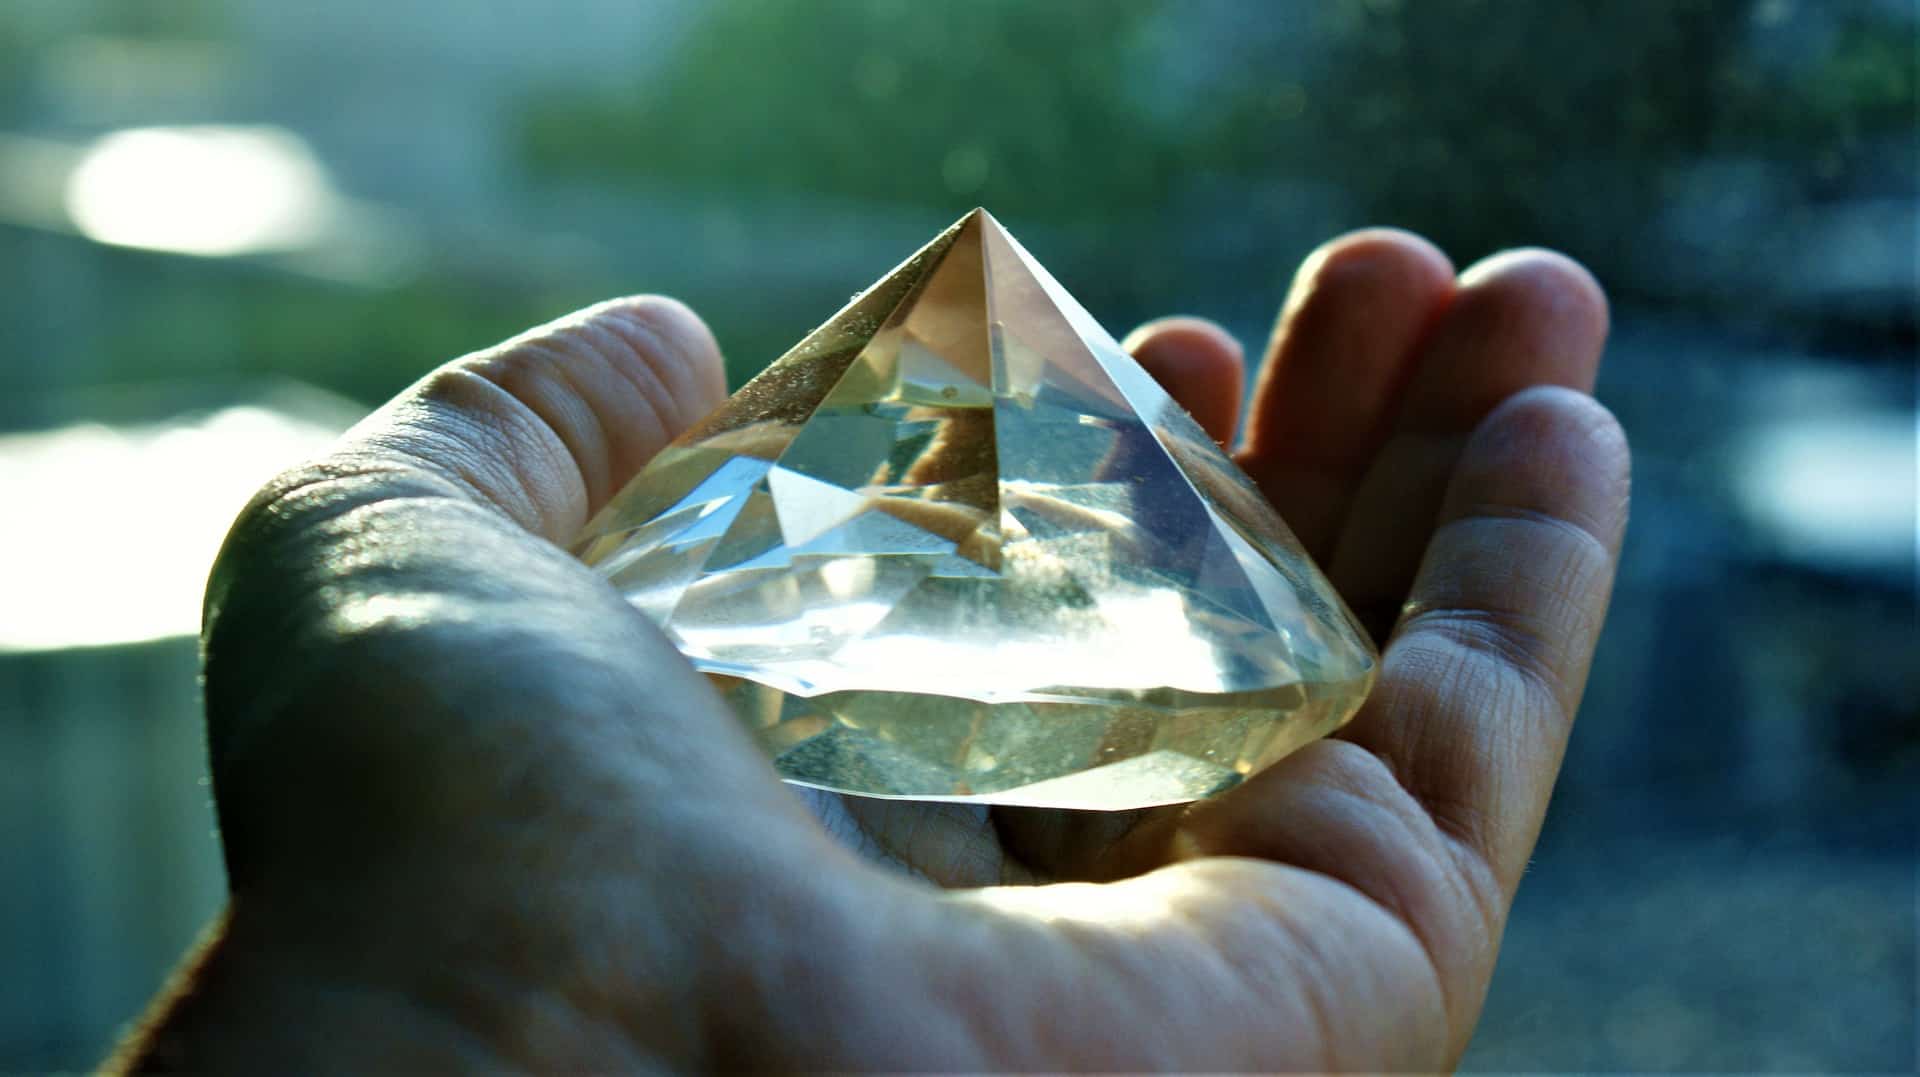 A hand that is holding a large diamond.